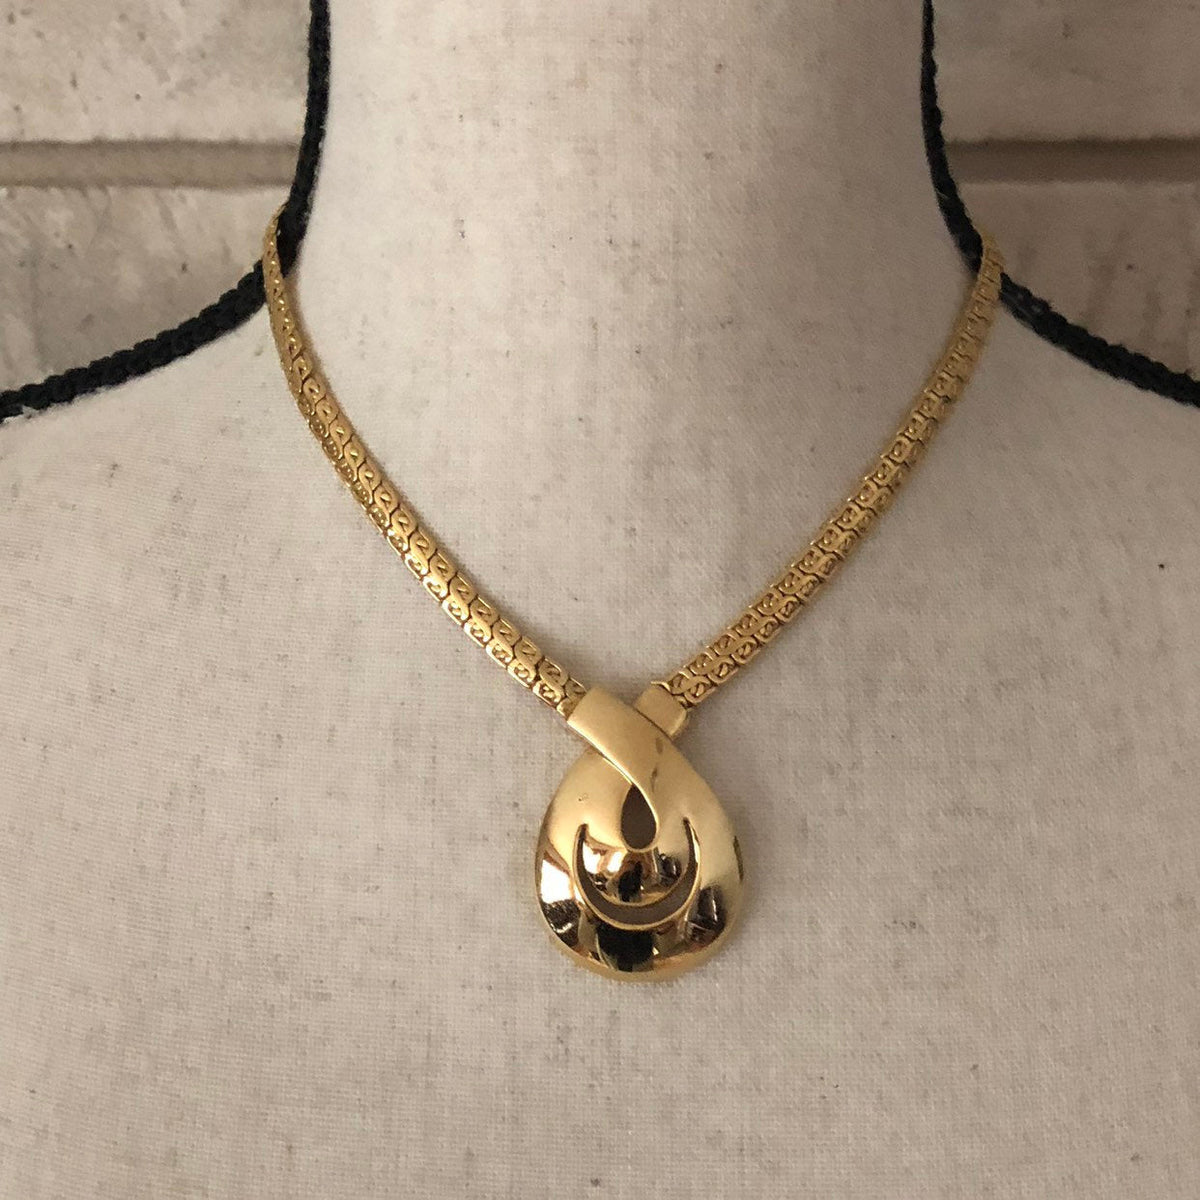 Vintage Napier Gold Chain Teardrop Necklace - 24 Wishes Vintage Jewelry